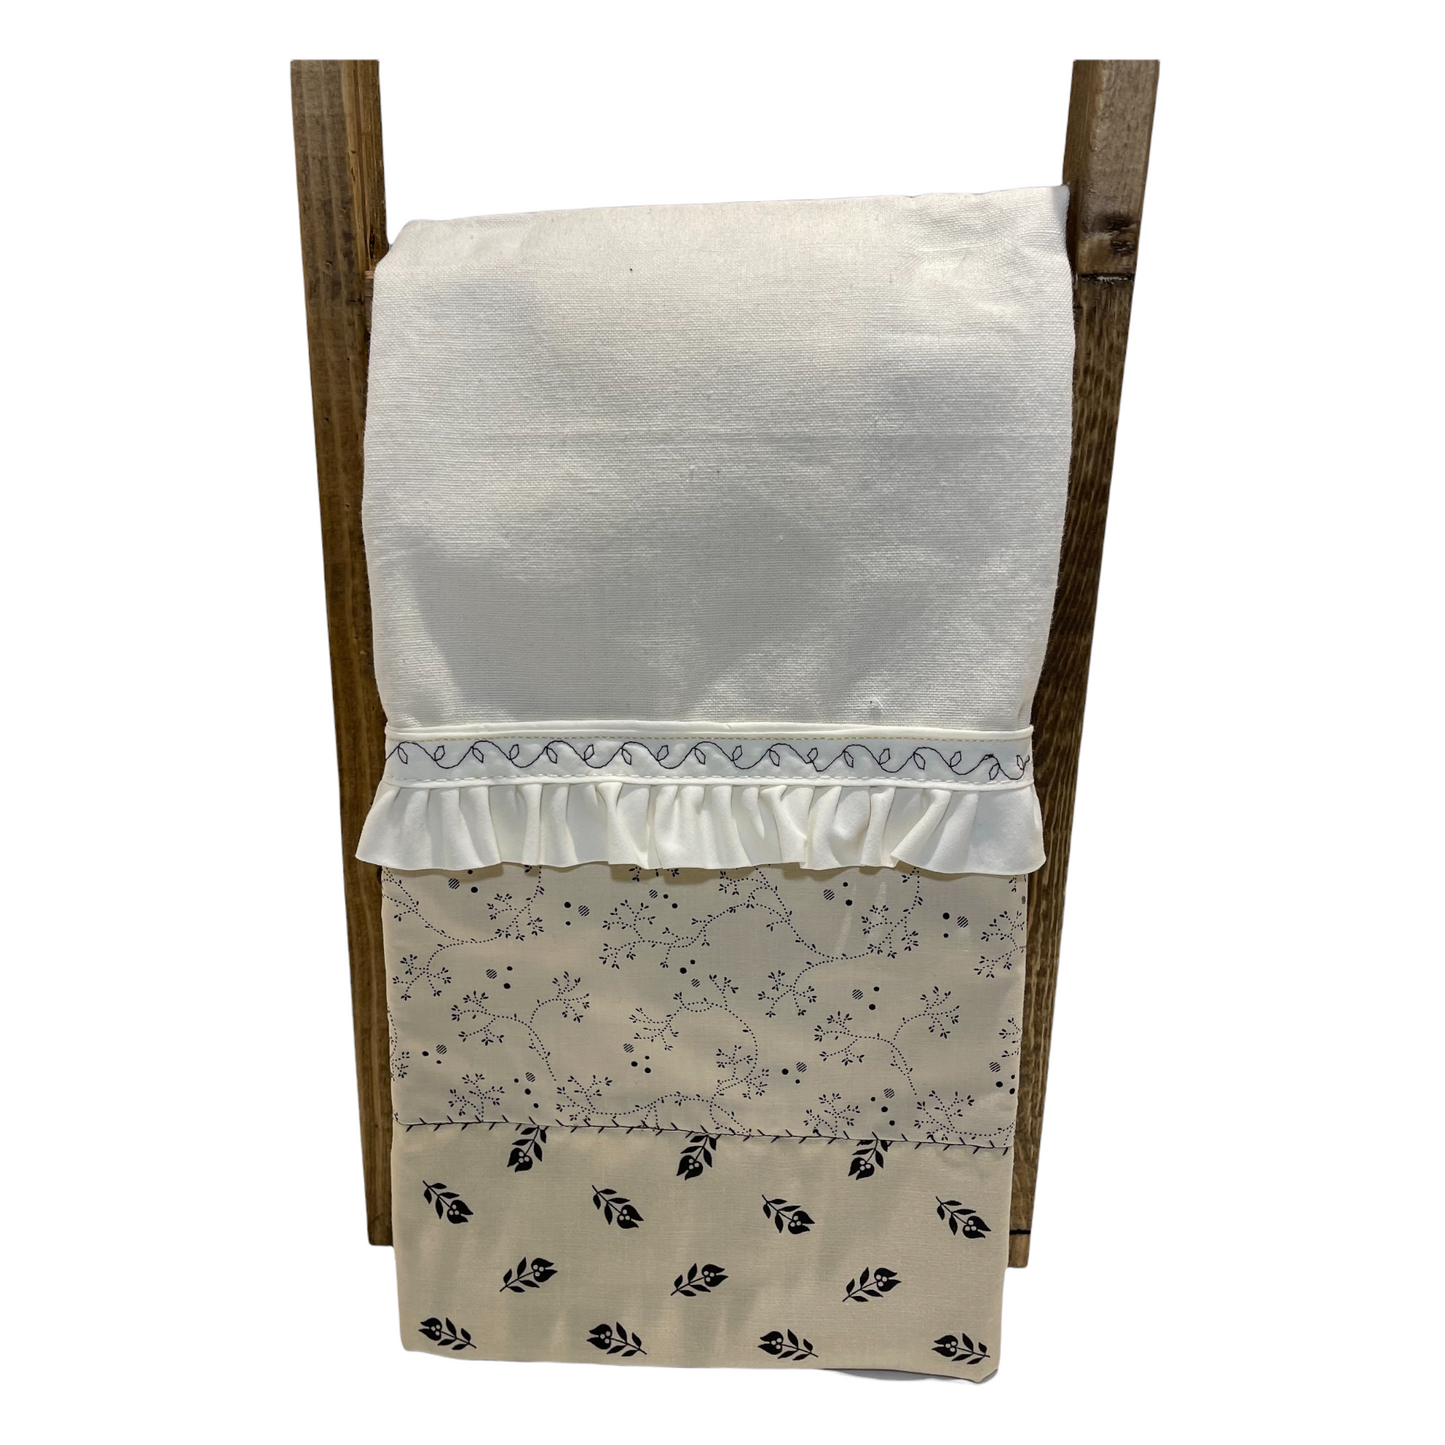 Handcrafted in Canada Farmhouse Style Dish Towel with black flowers on a beige cotton towel and embroidery details.  Purchase this product or learn to make your own on the Home Stitchery Decor YouTube Channel.  Part of a coordinating product line. 